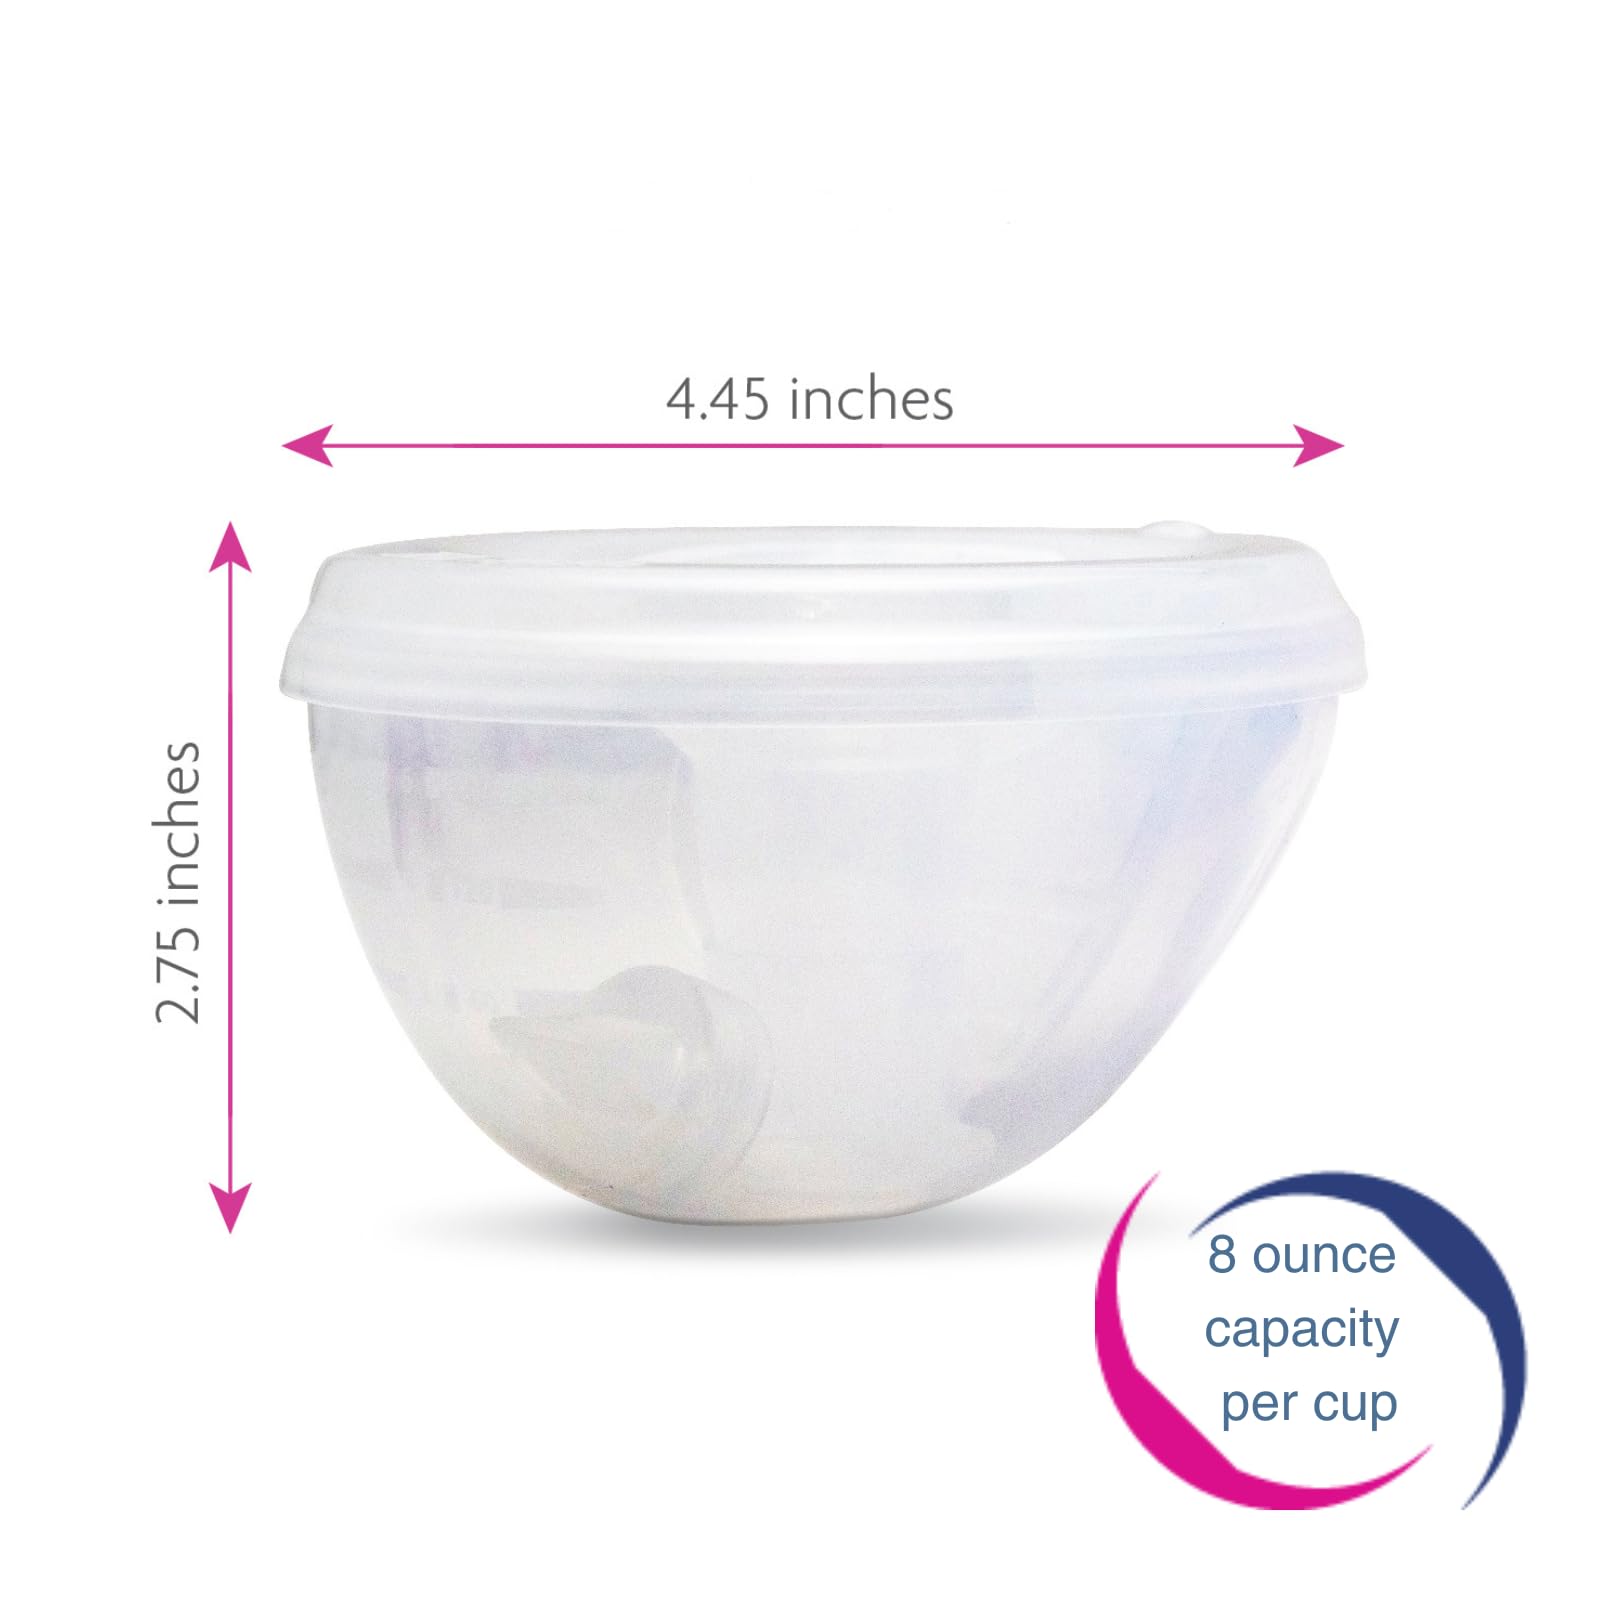 Freemie Hands-Free and Discreet Breast Milk Collection Cup Set | Pump with Your Clothes On Anywhere, Anytime | Sizes 25mm and 28mm Flanges Included | Holds Up to 8oz | Pump Not Included